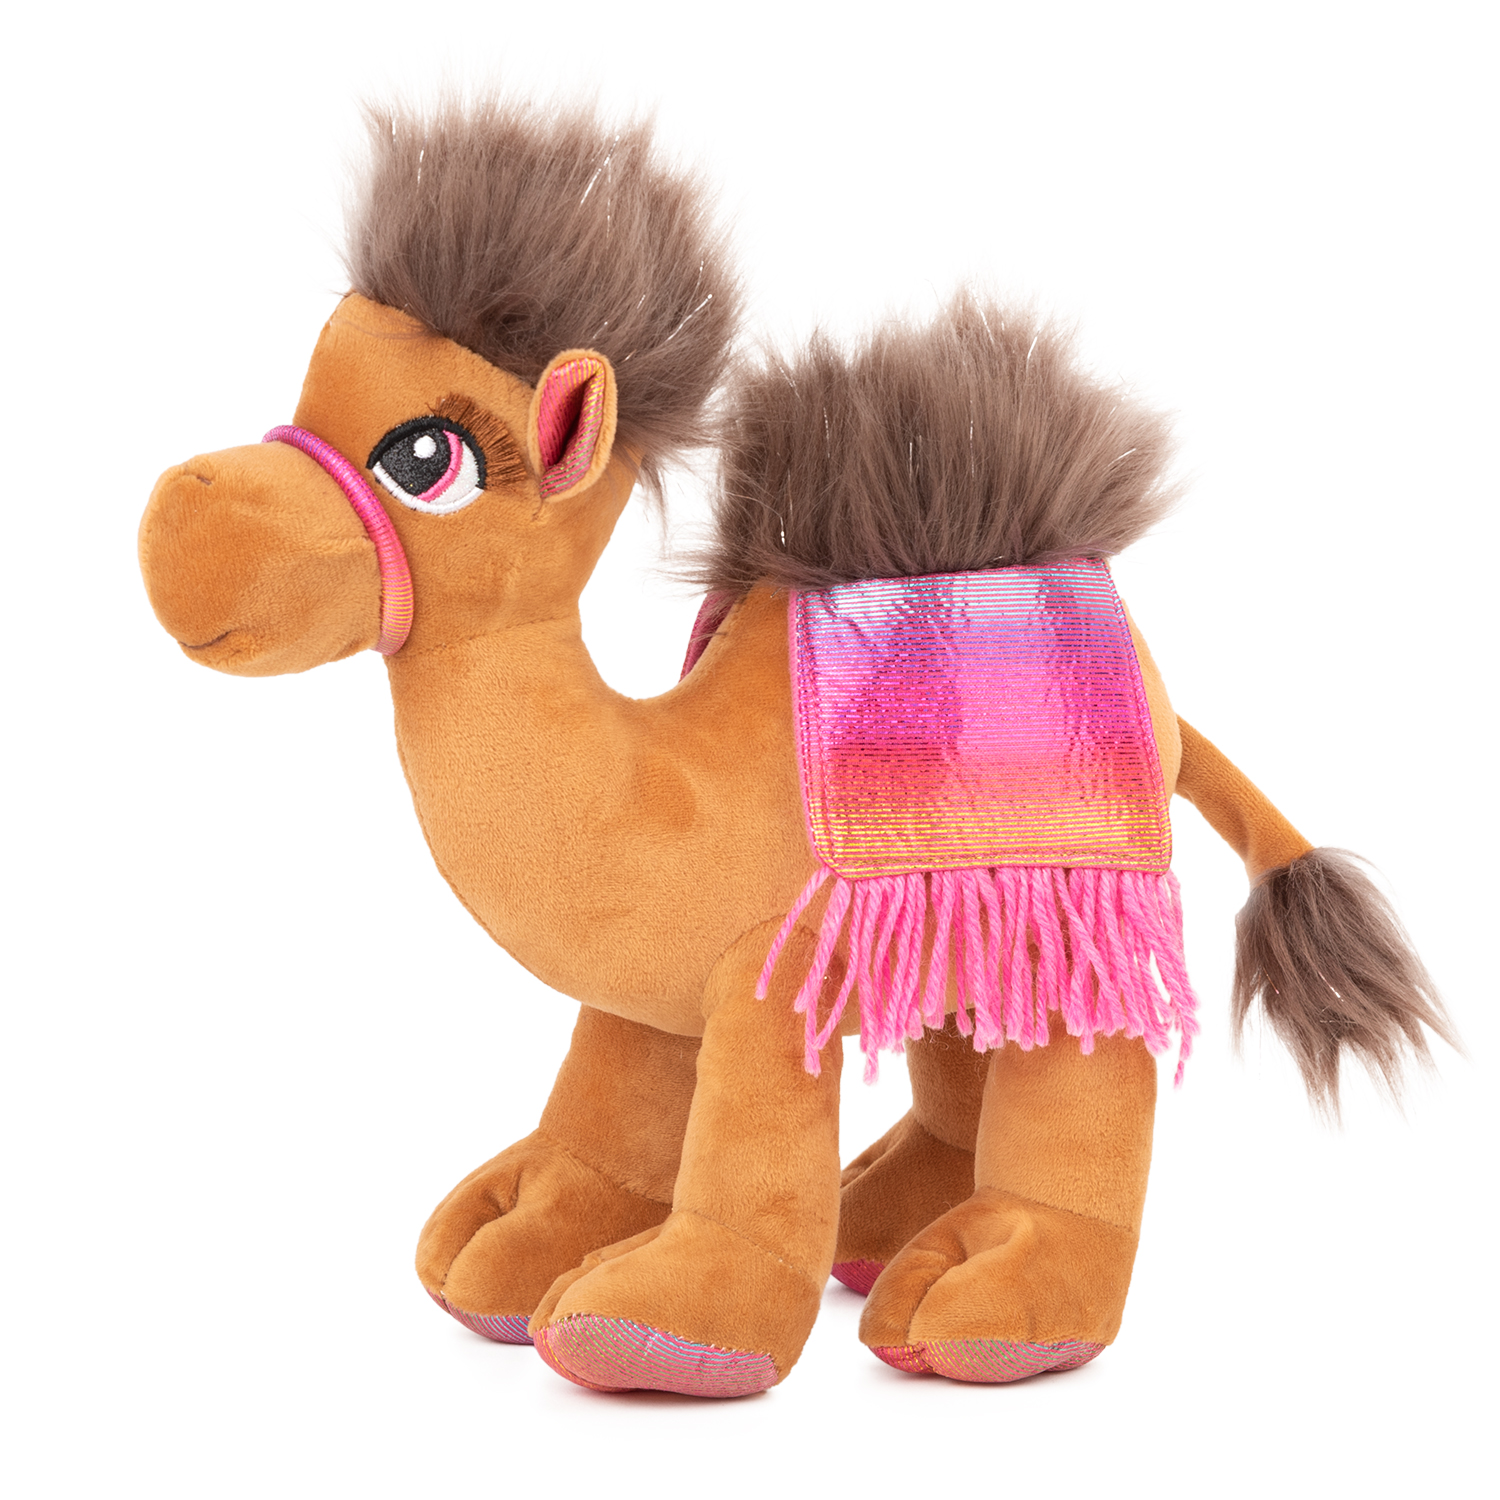 Camel with eyelashes and colored saddle - Brown